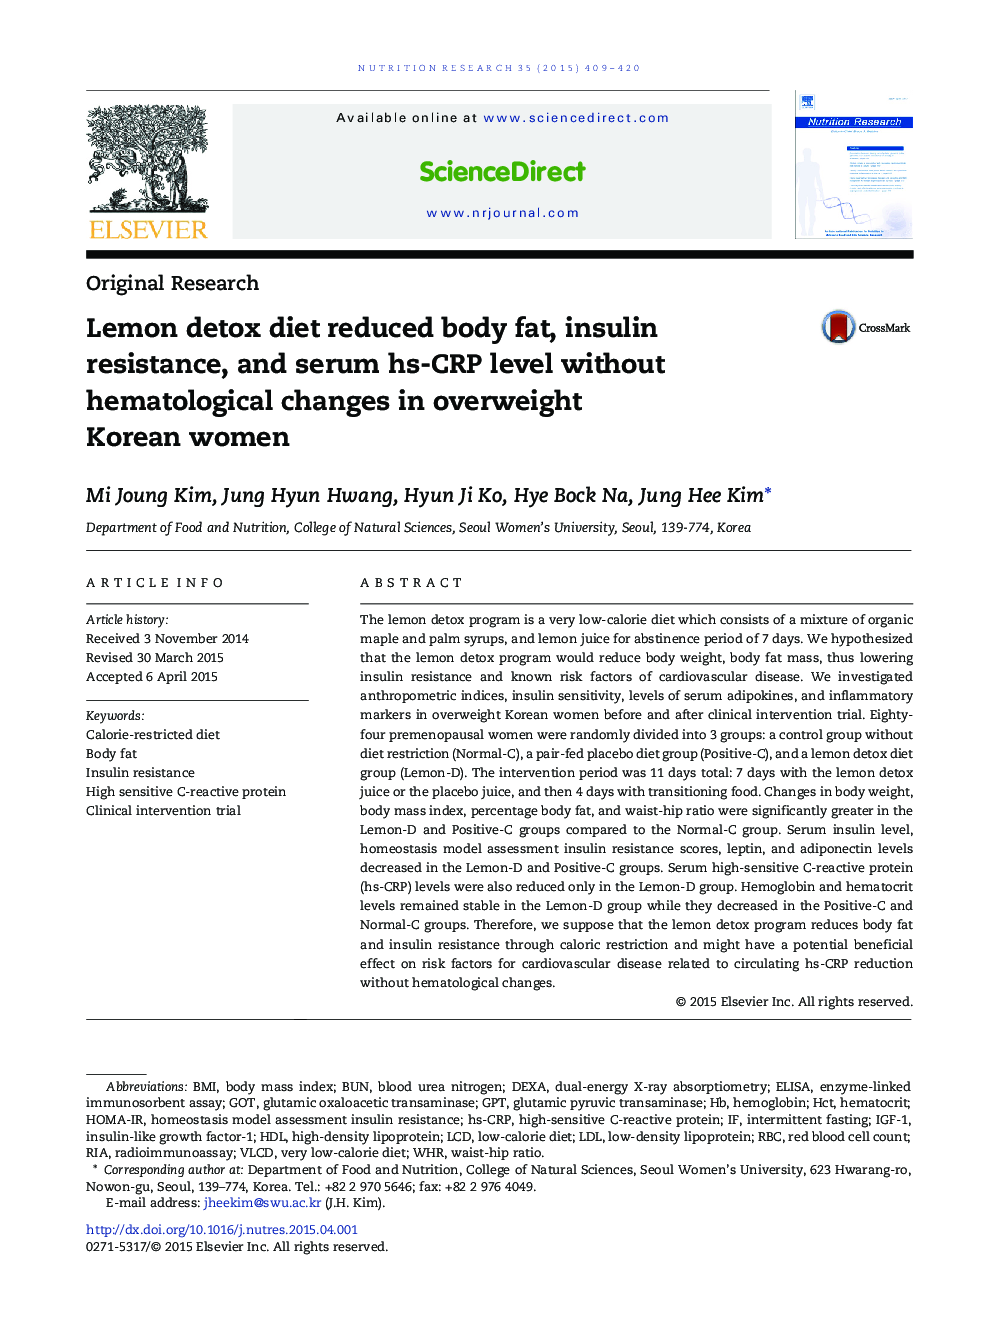 Original ResearchLemon detox diet reduced body fat, insulin resistance, and serum hs-CRP level without hematological changes in overweight Korean women